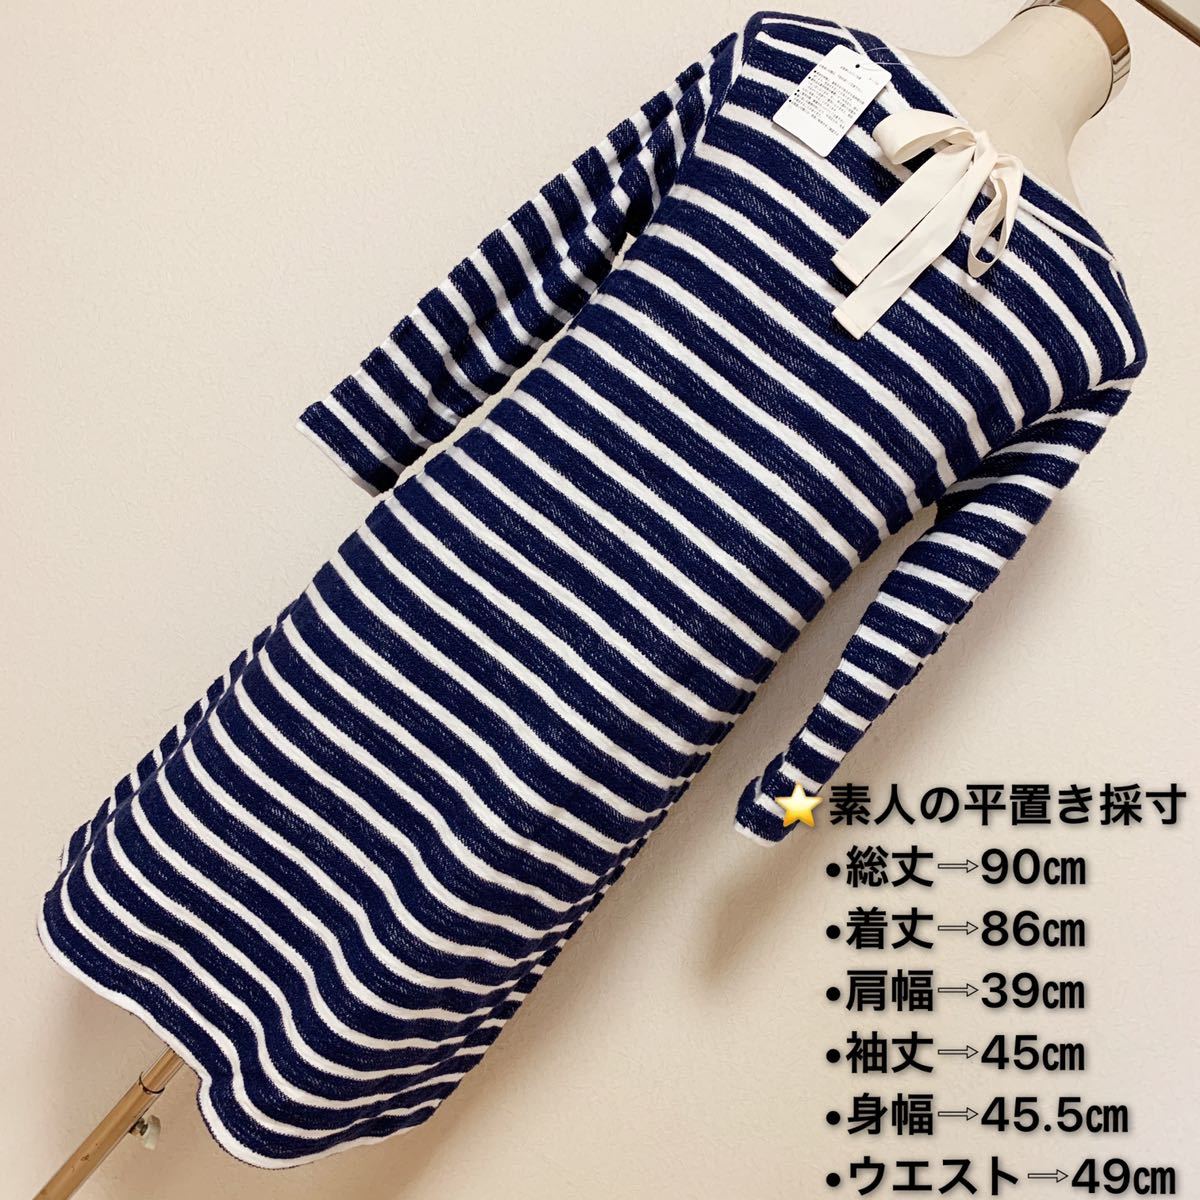 NATURAL BEAUTY BASIC One-piece, new goods unused border, lady's super-discount wonderful brand on goods pretty stylish going to school commuting te-to tag attaching 